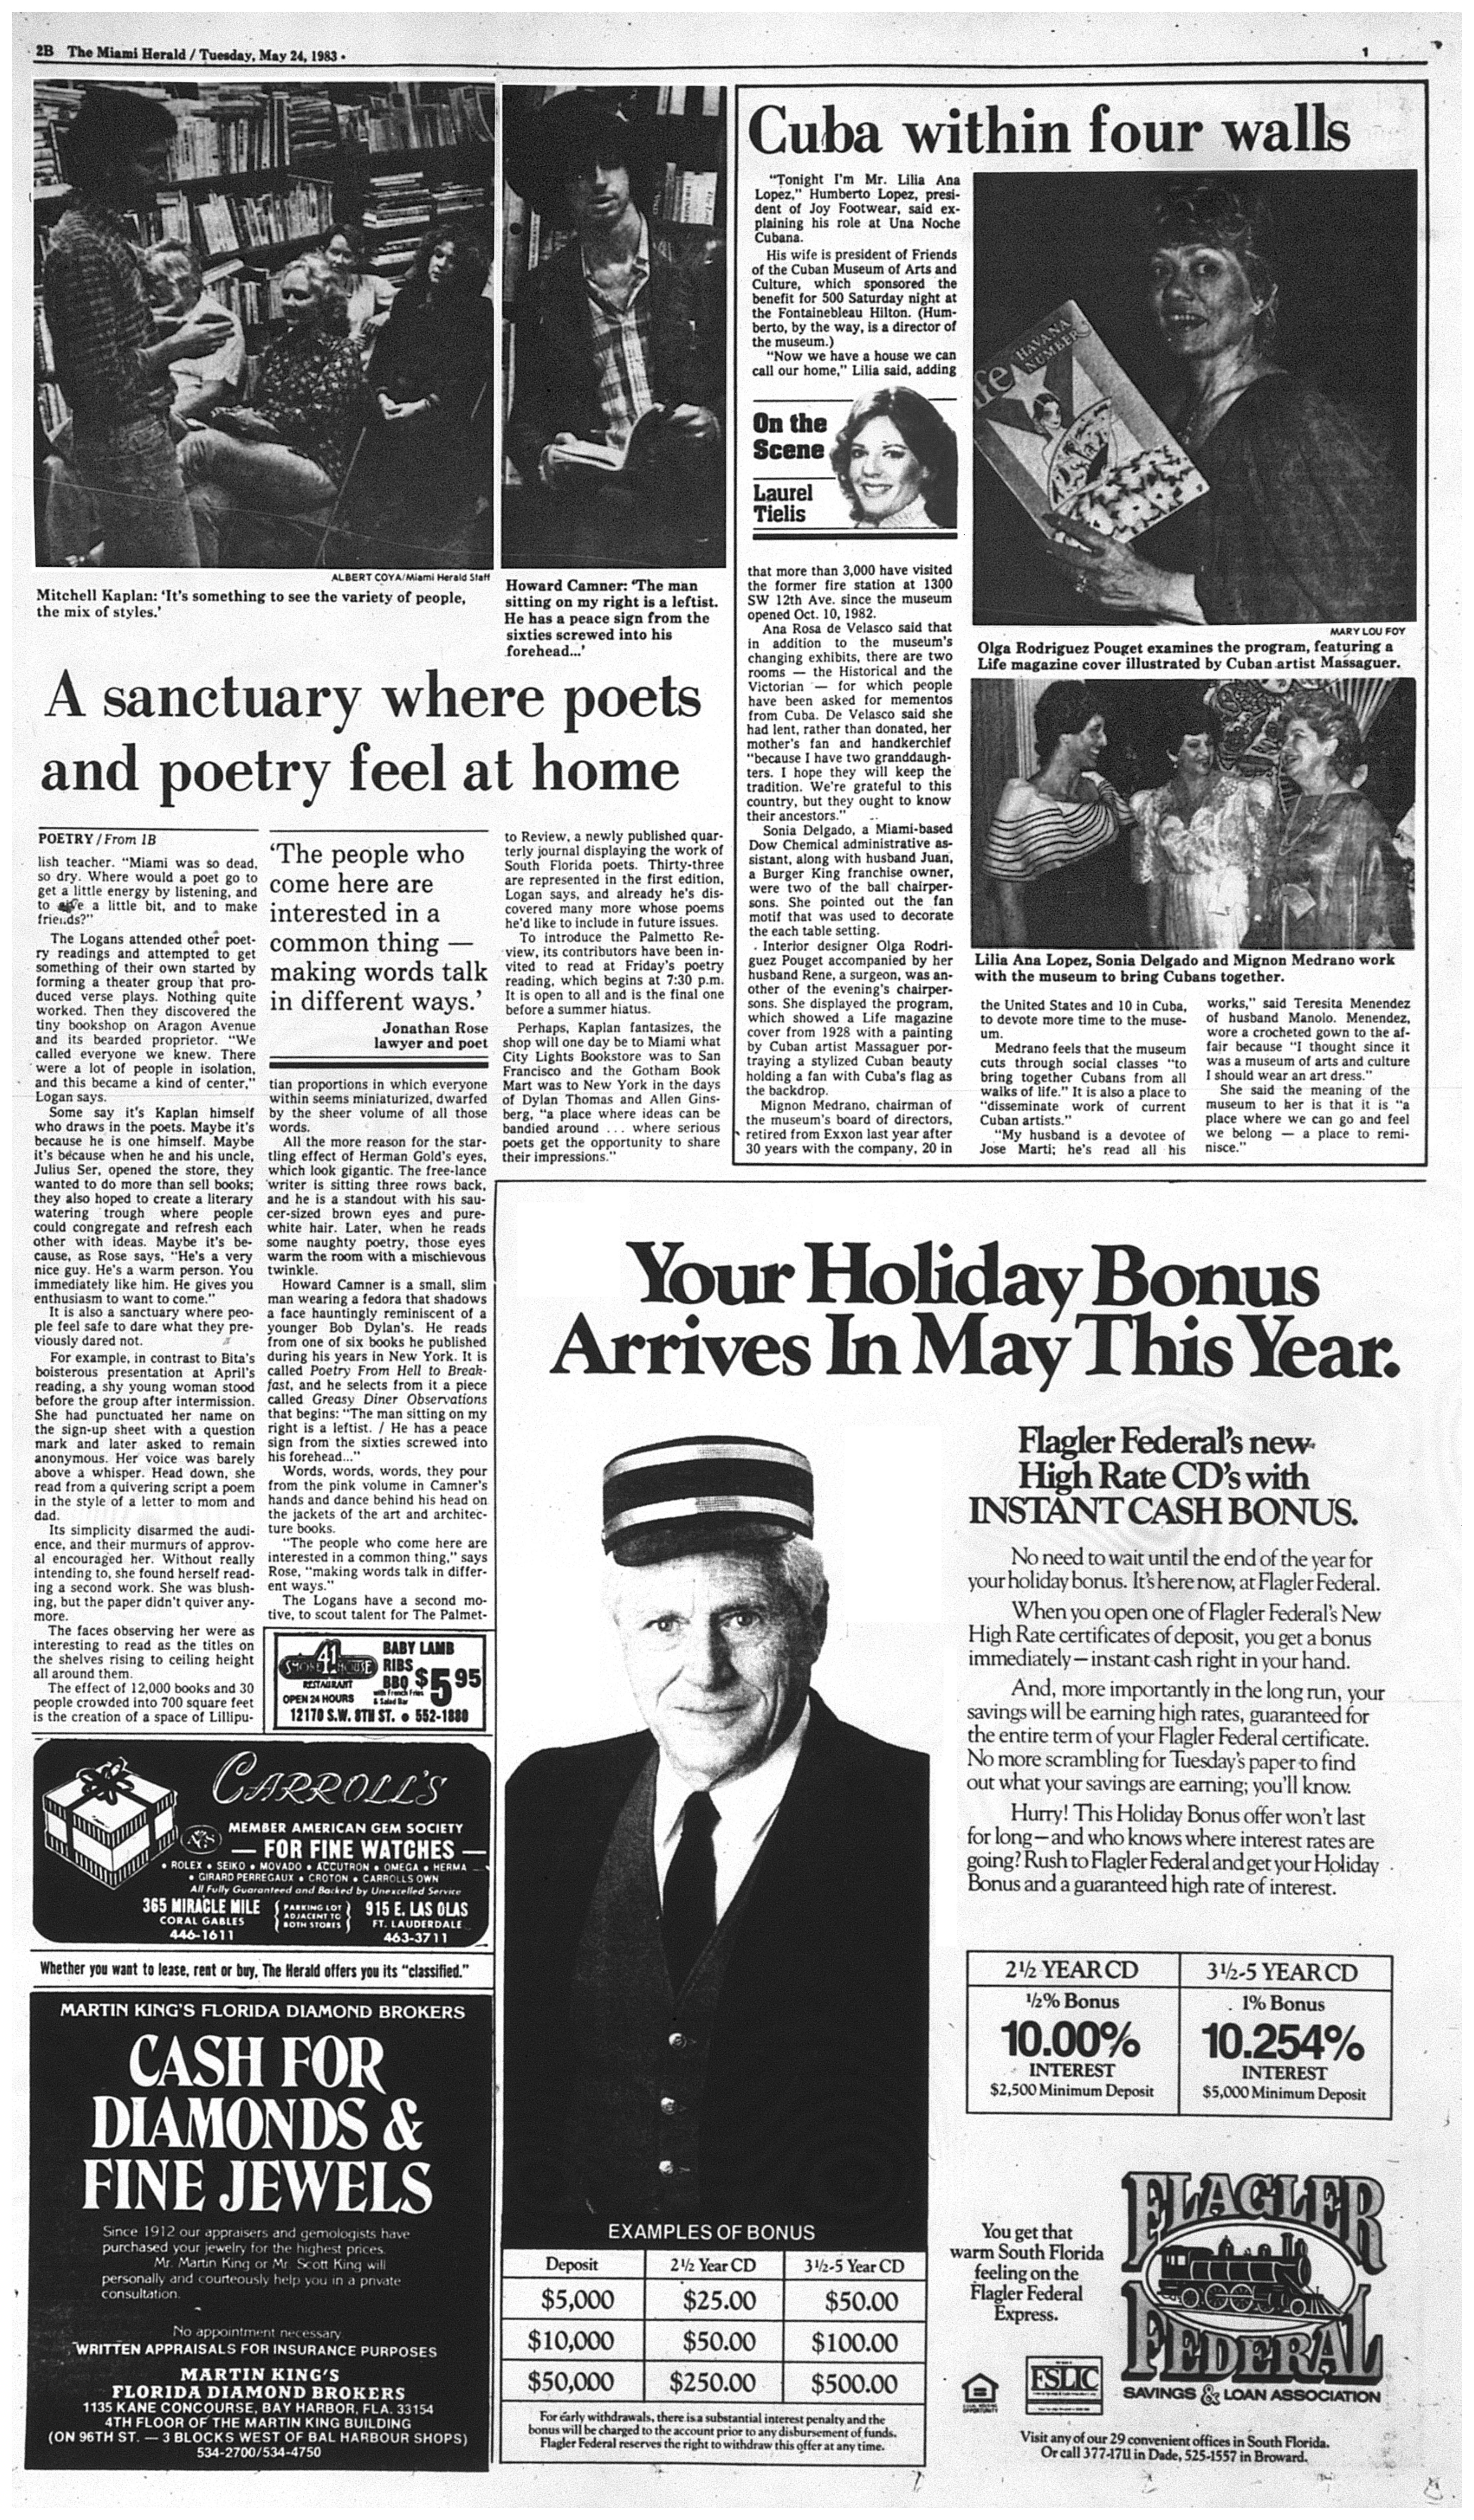 The Miami Herald Page 2B Tuesday, May 24, 1983 The Miami Herald